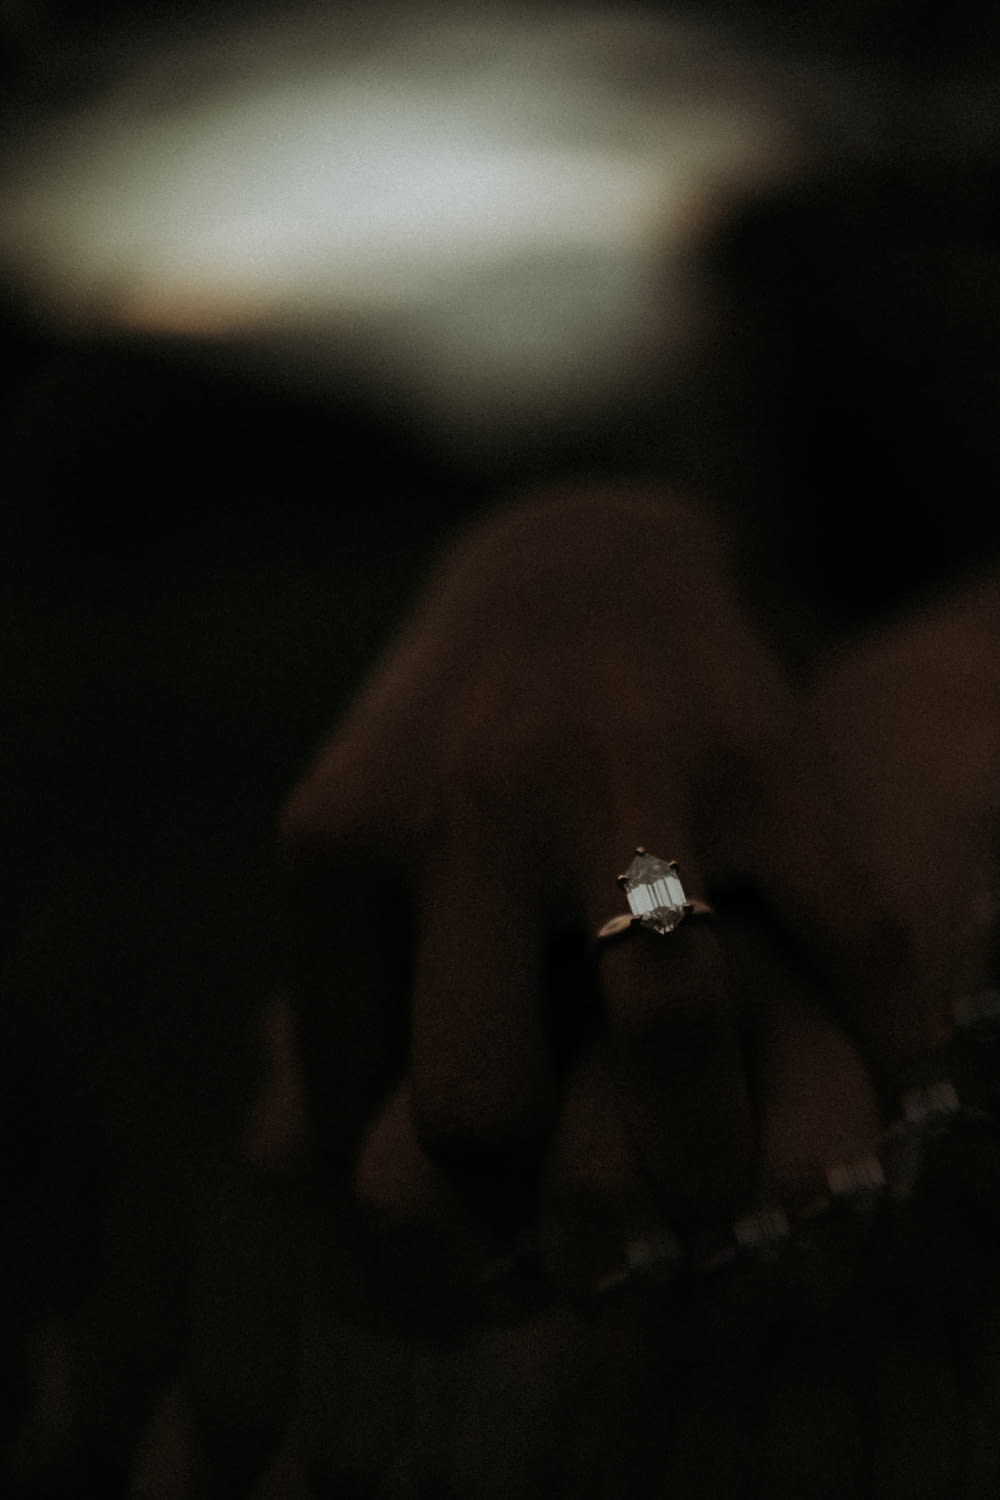 a close up of a person's hand holding a diamond ring